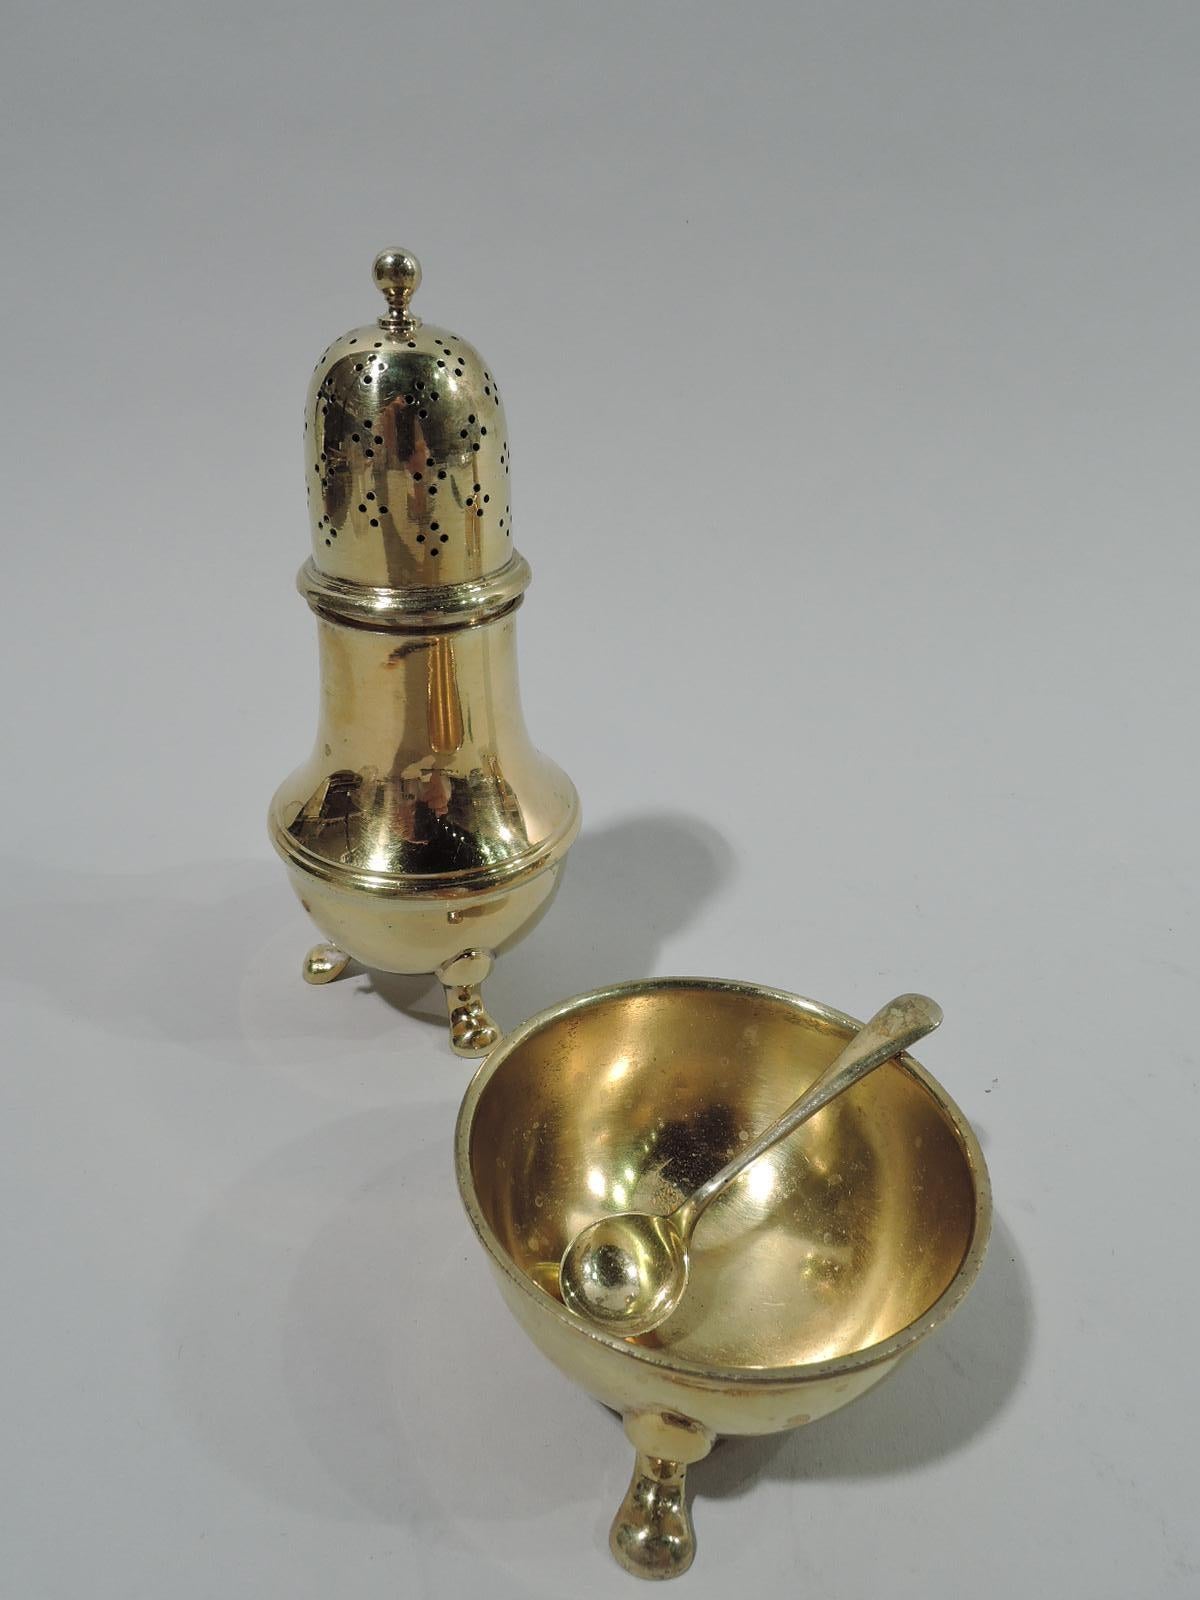 Two pairs of American gilt sterling silver open salts and pepper shakers. Made by Tiffany & Co. in New York. Each salt: Hemispheric bowl with hoof supports. Each pepper: Baluster with 3 hoof supports; cover domed with ornamental piercing and ball